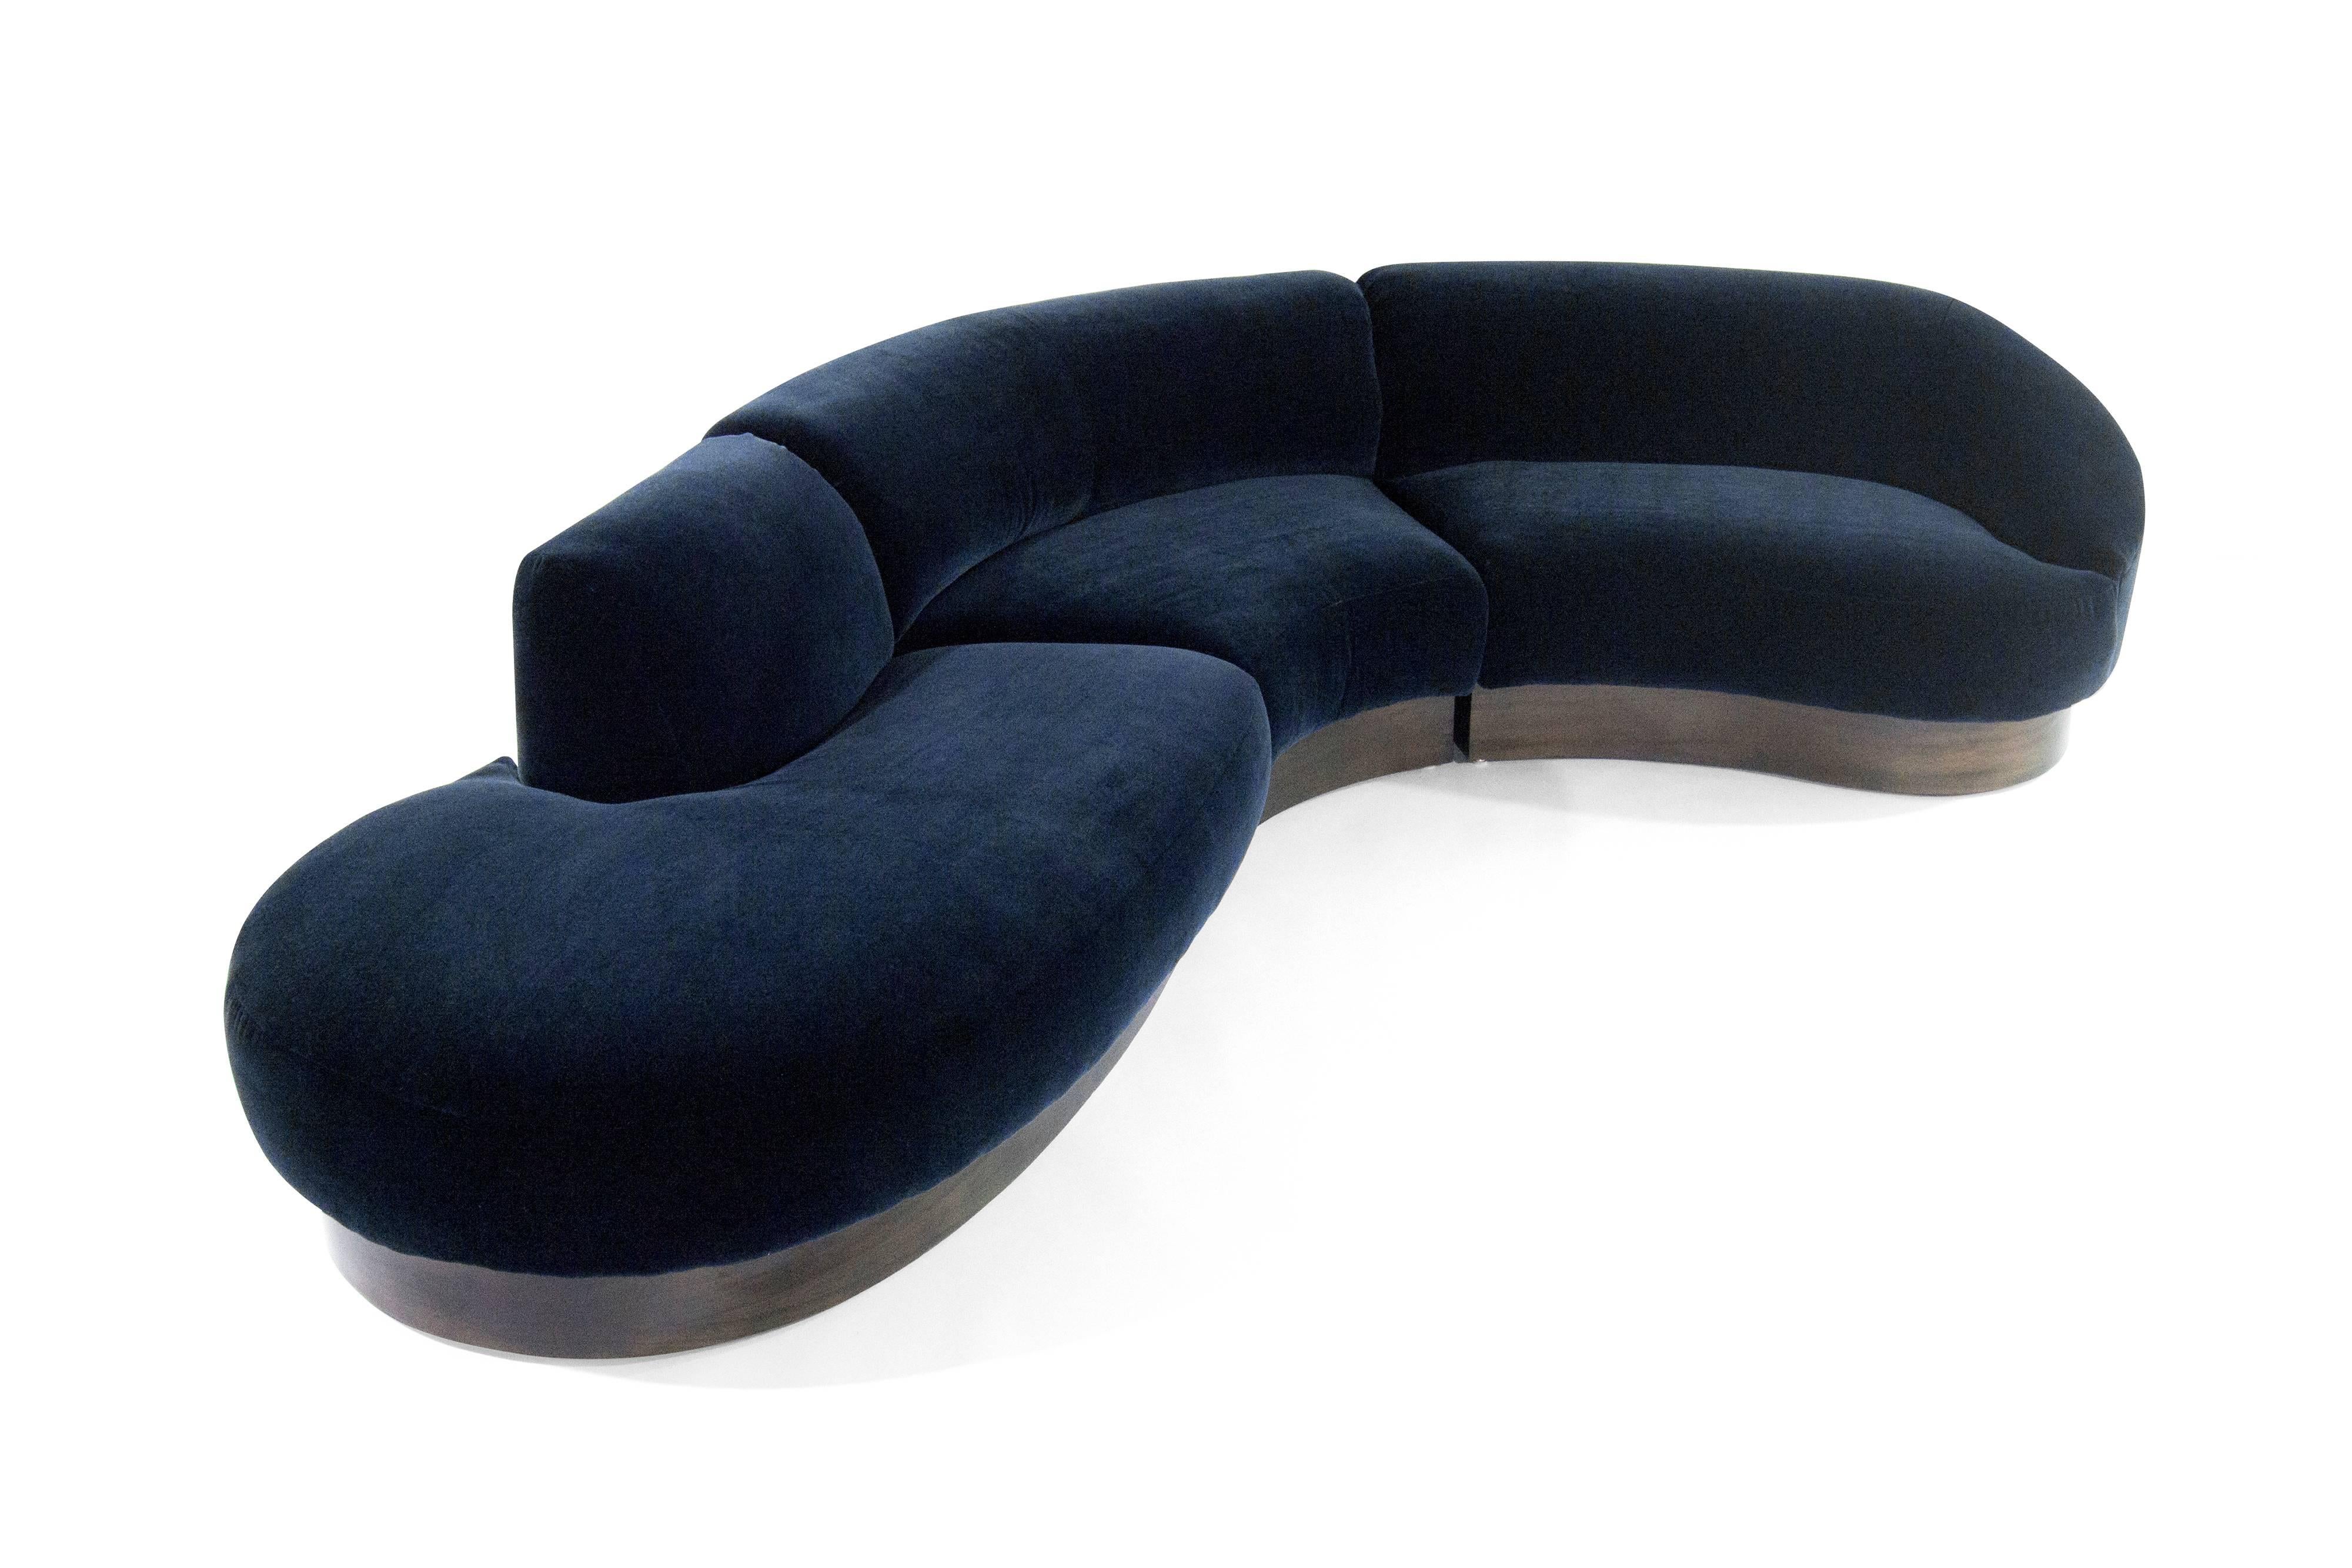 An extremely rare three-piece sectional sofa designed by Vladimir Kagan for Directional, circa 1970s. Newly upholstered in deep blue mohair by Donghia. Walnut bases fully restored.